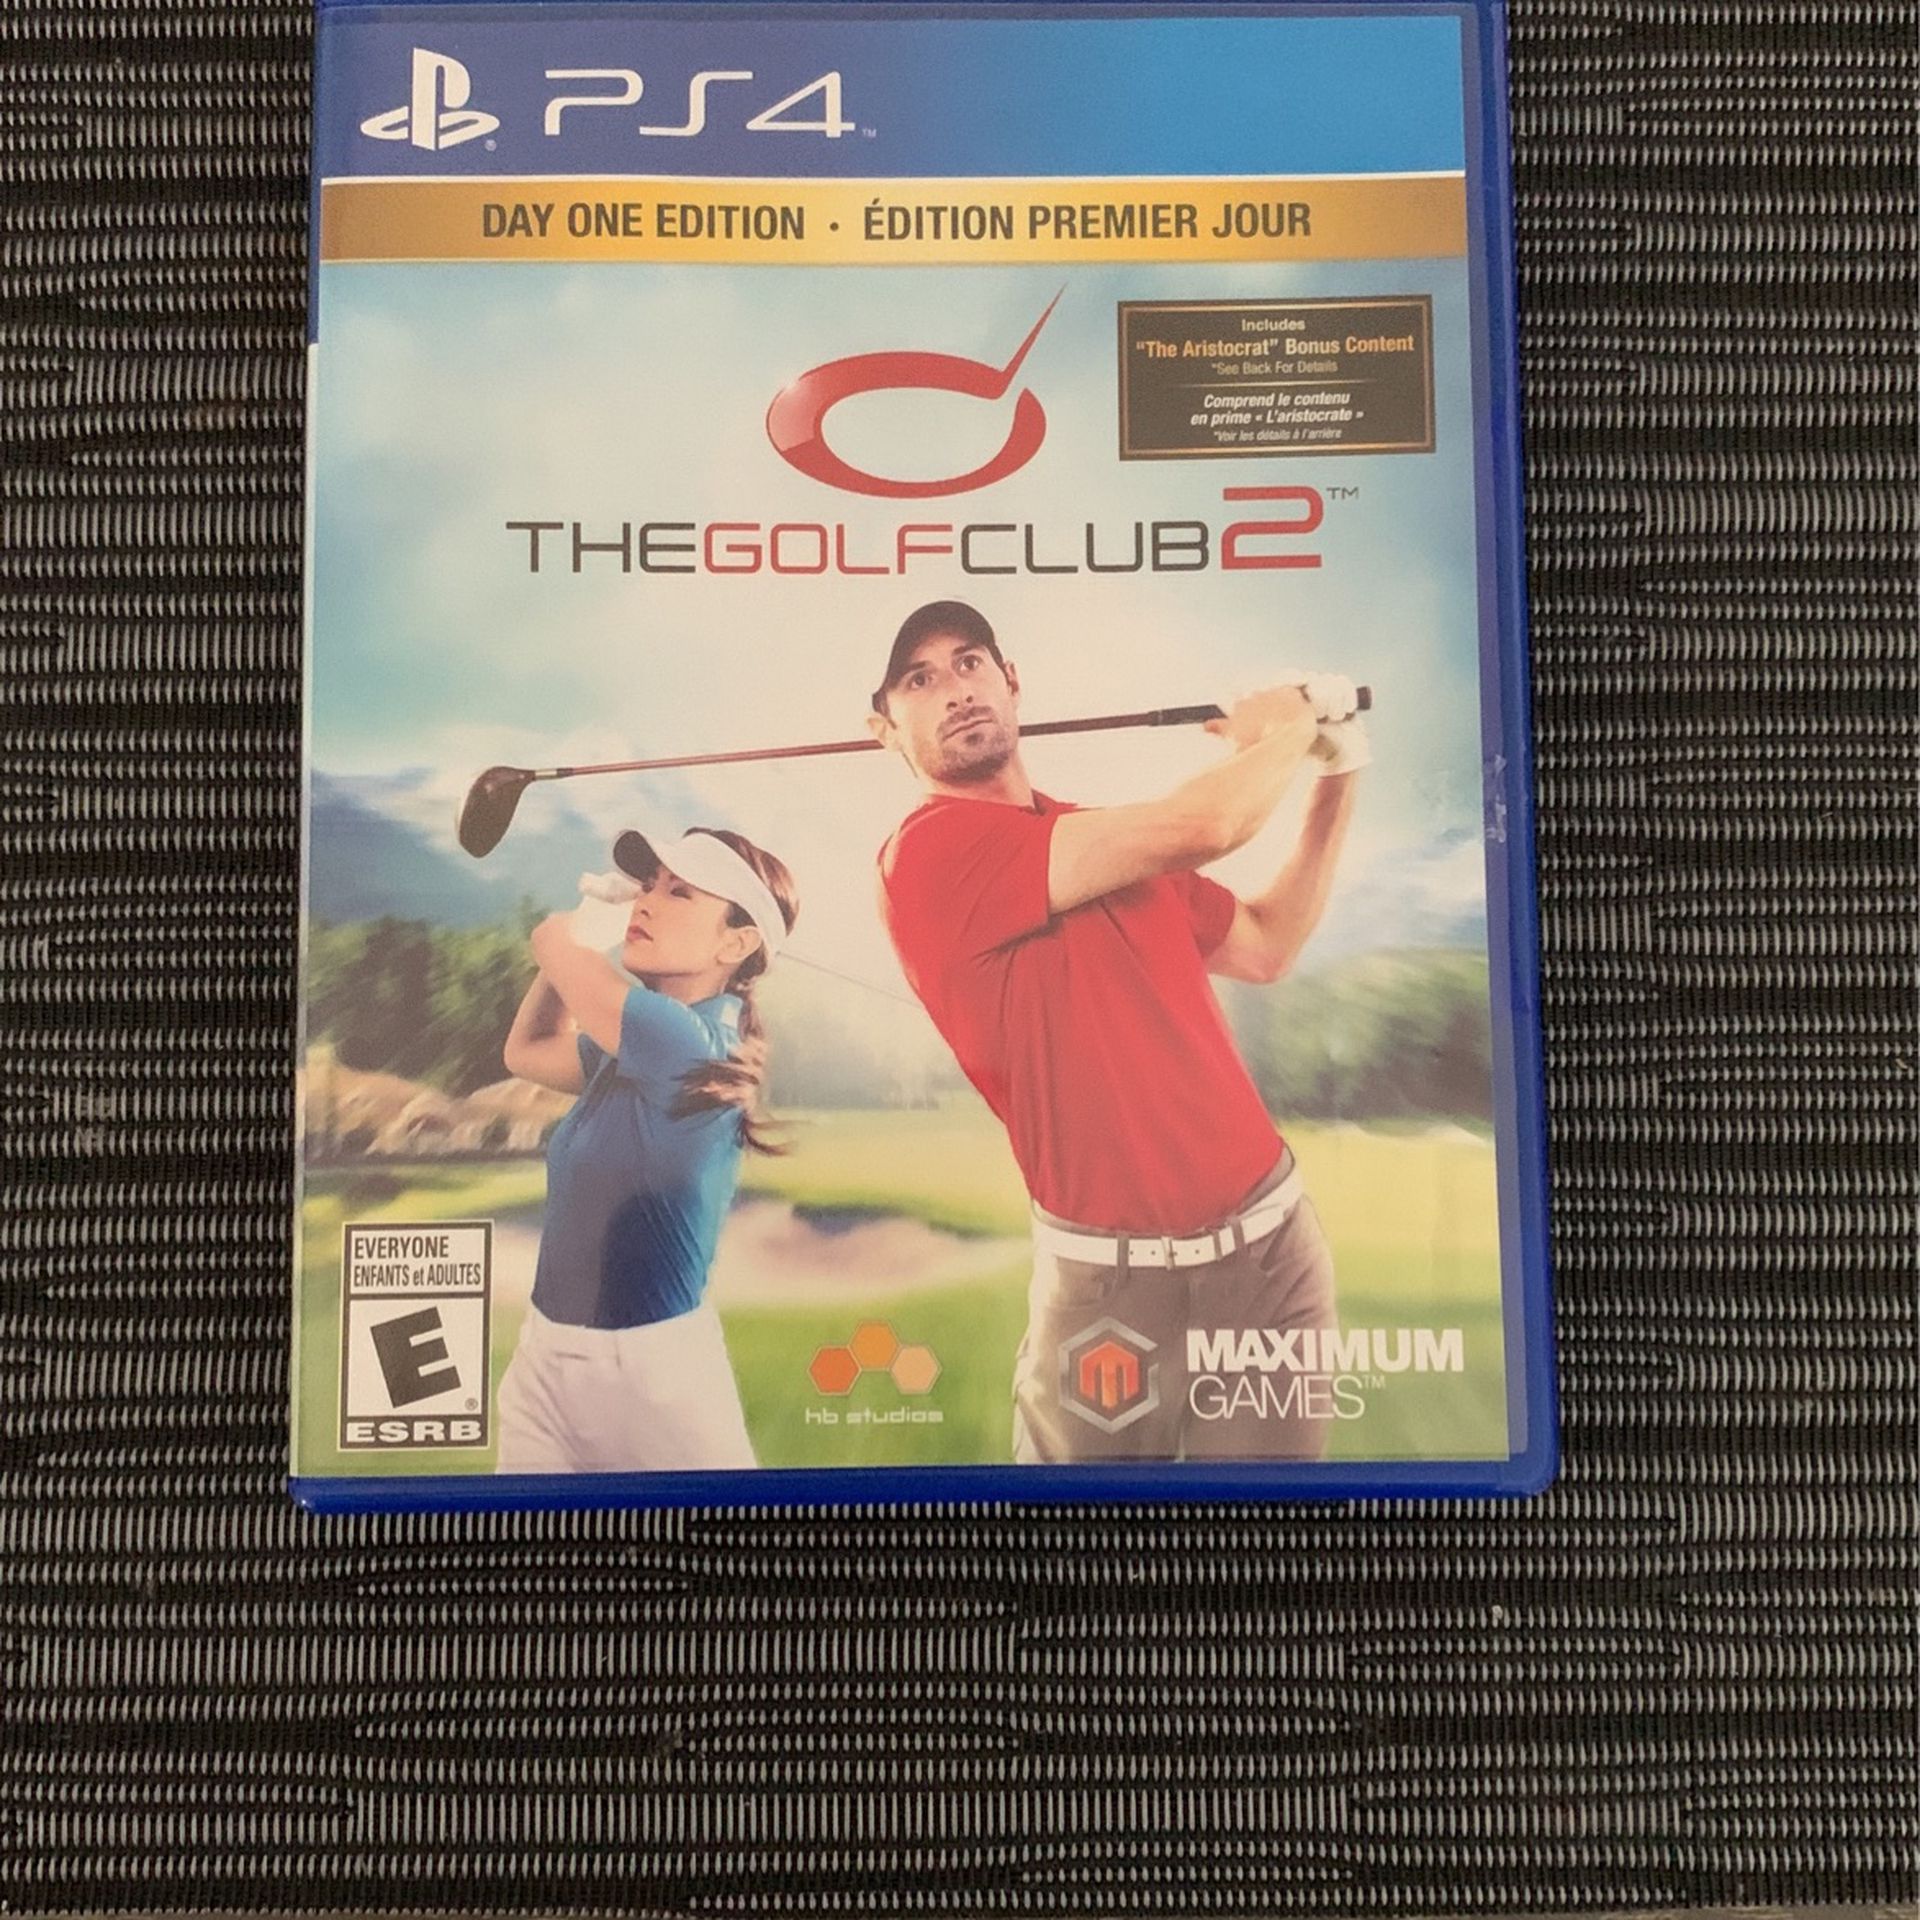 PS4 The Golfclub2